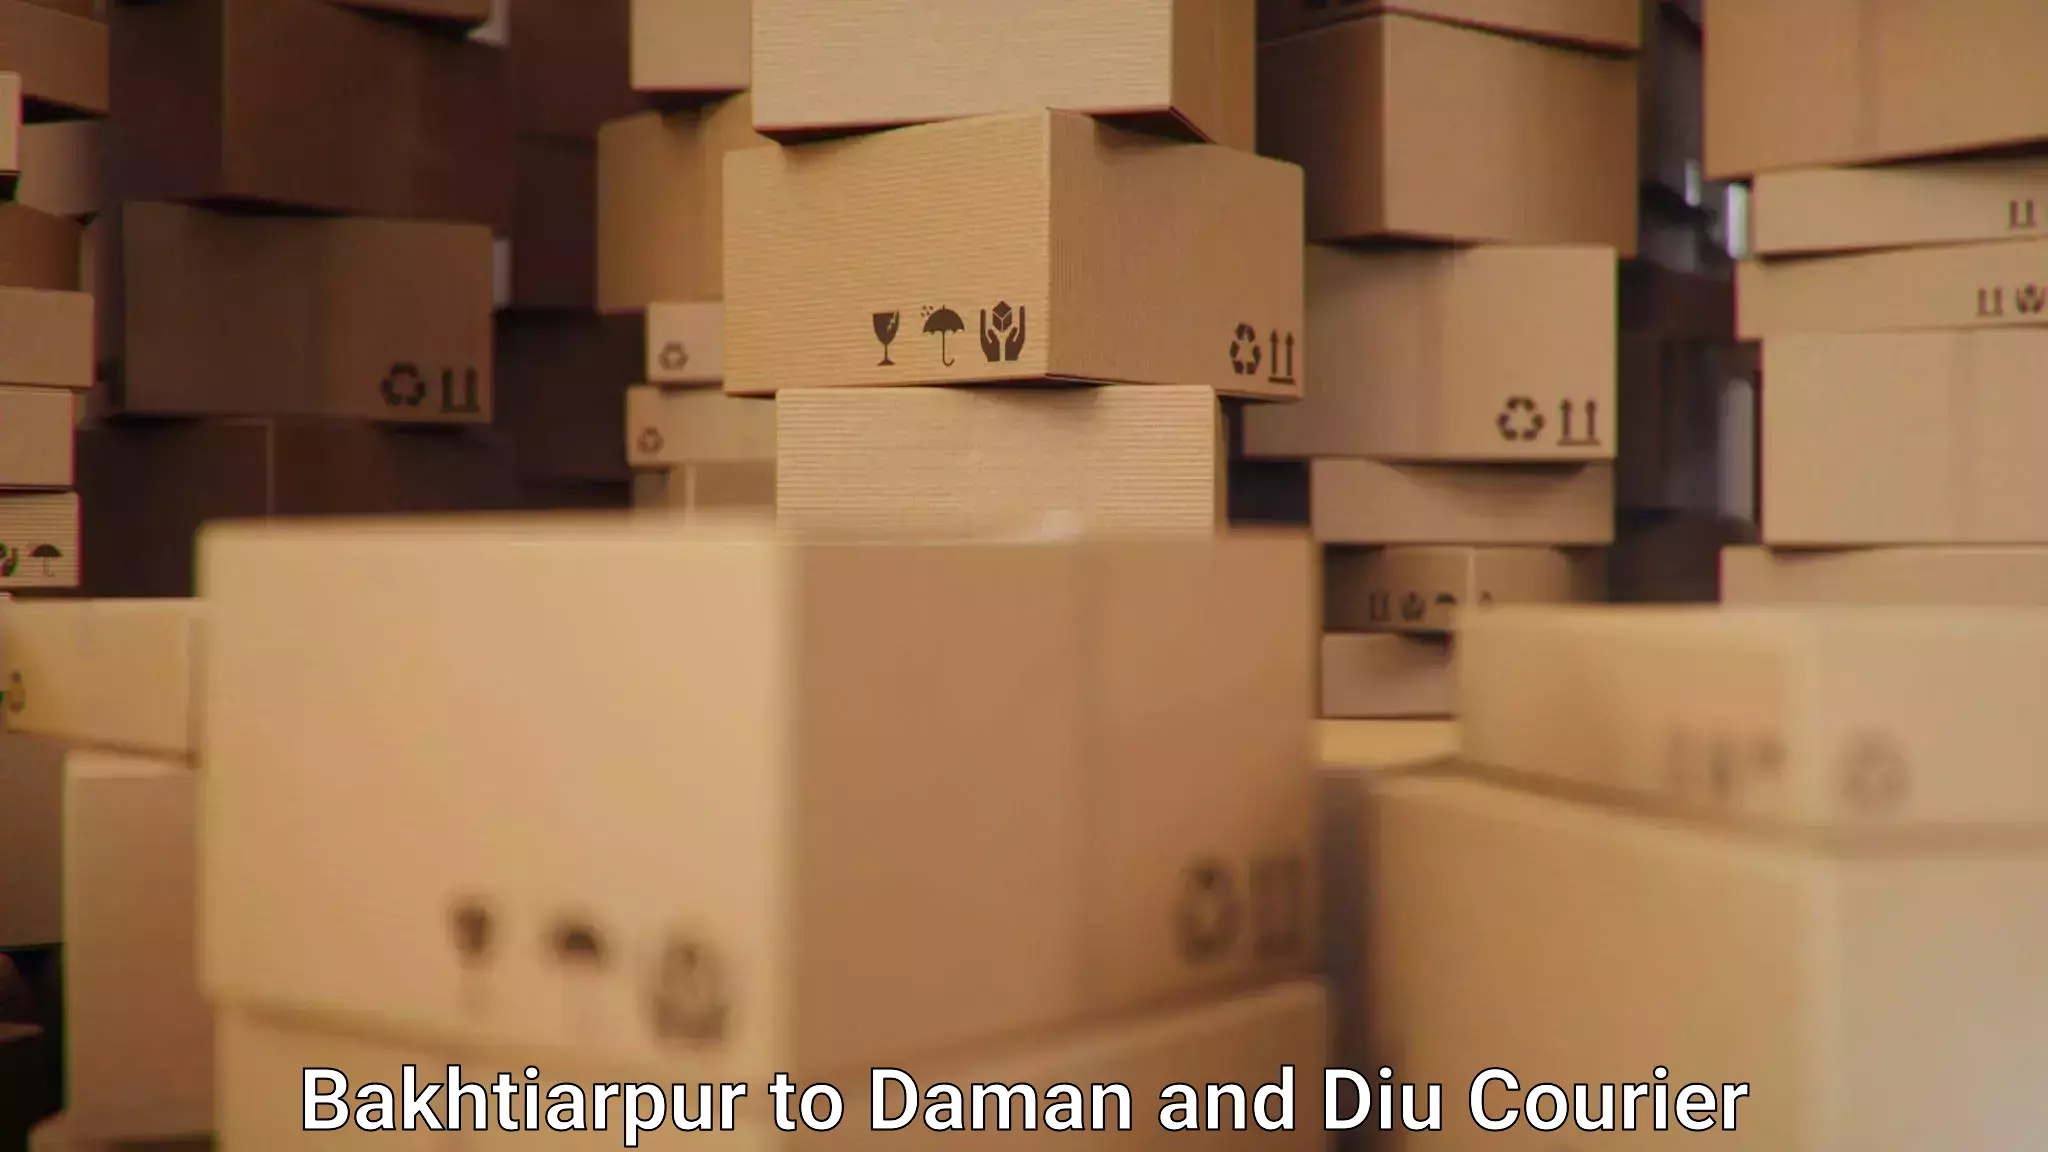 24/7 courier service in Bakhtiarpur to Daman and Diu